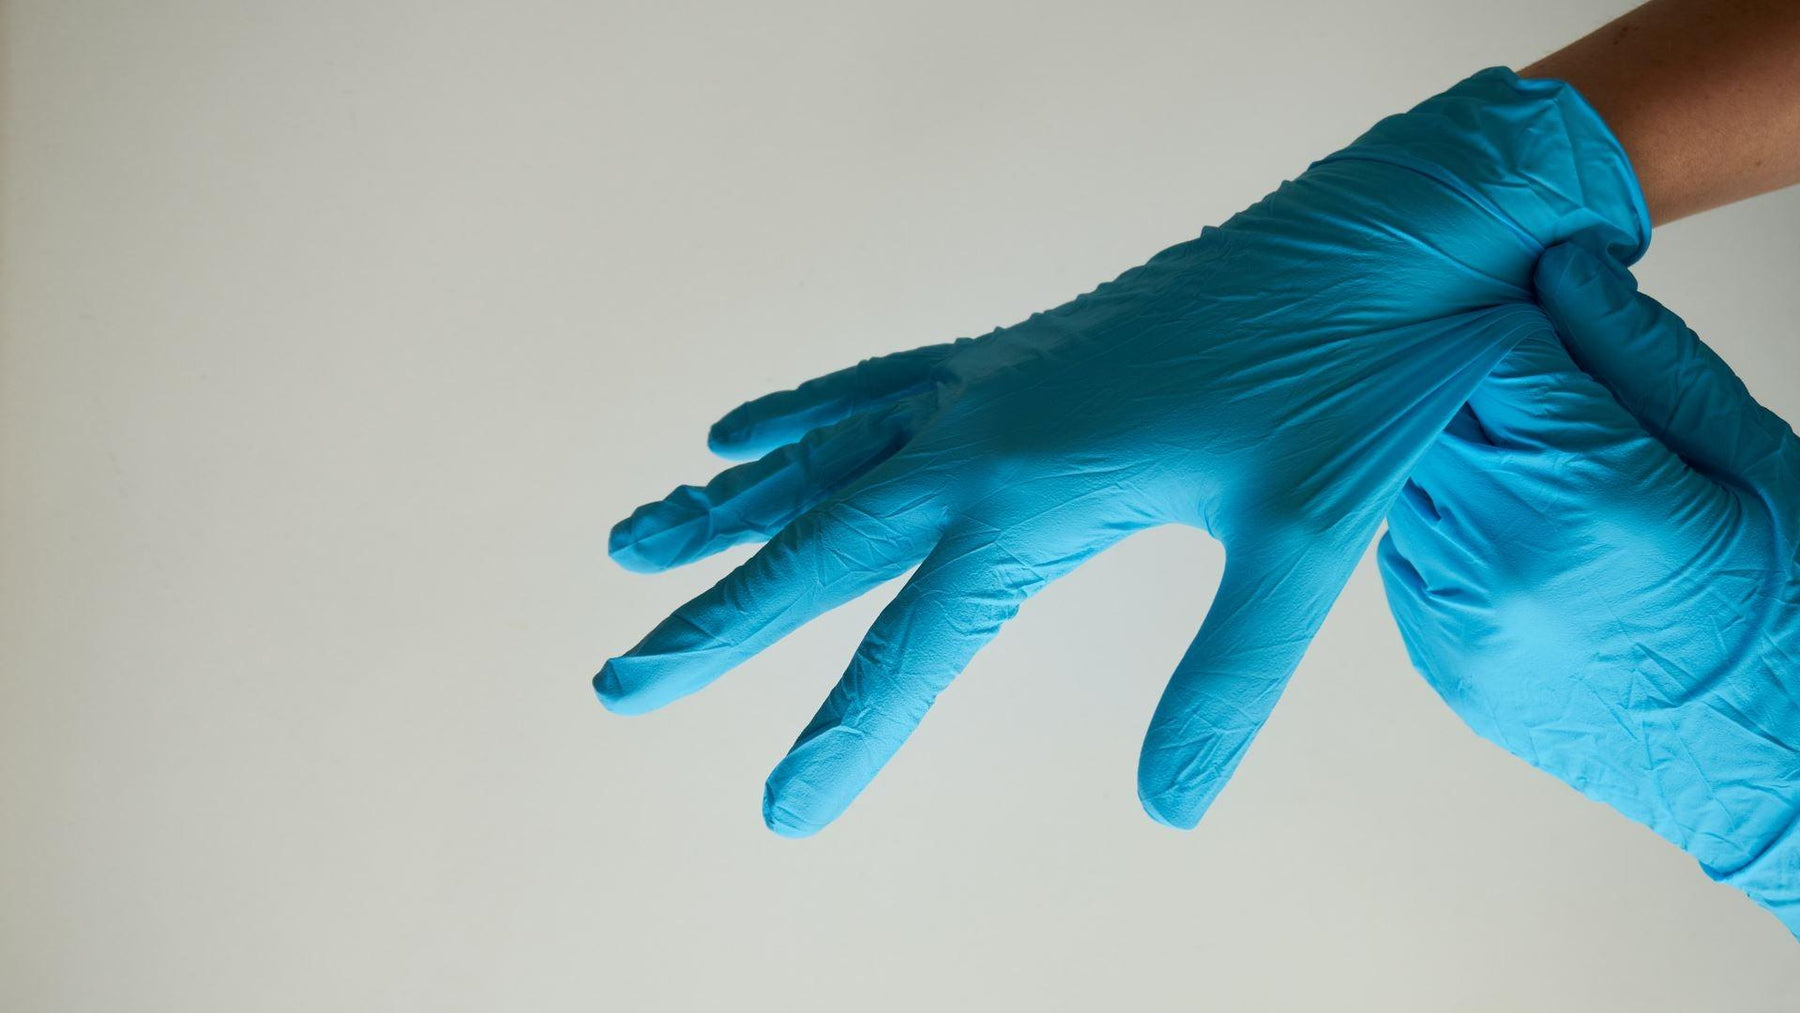 Eight Parameters to Consider when Buying Disposable Gloves